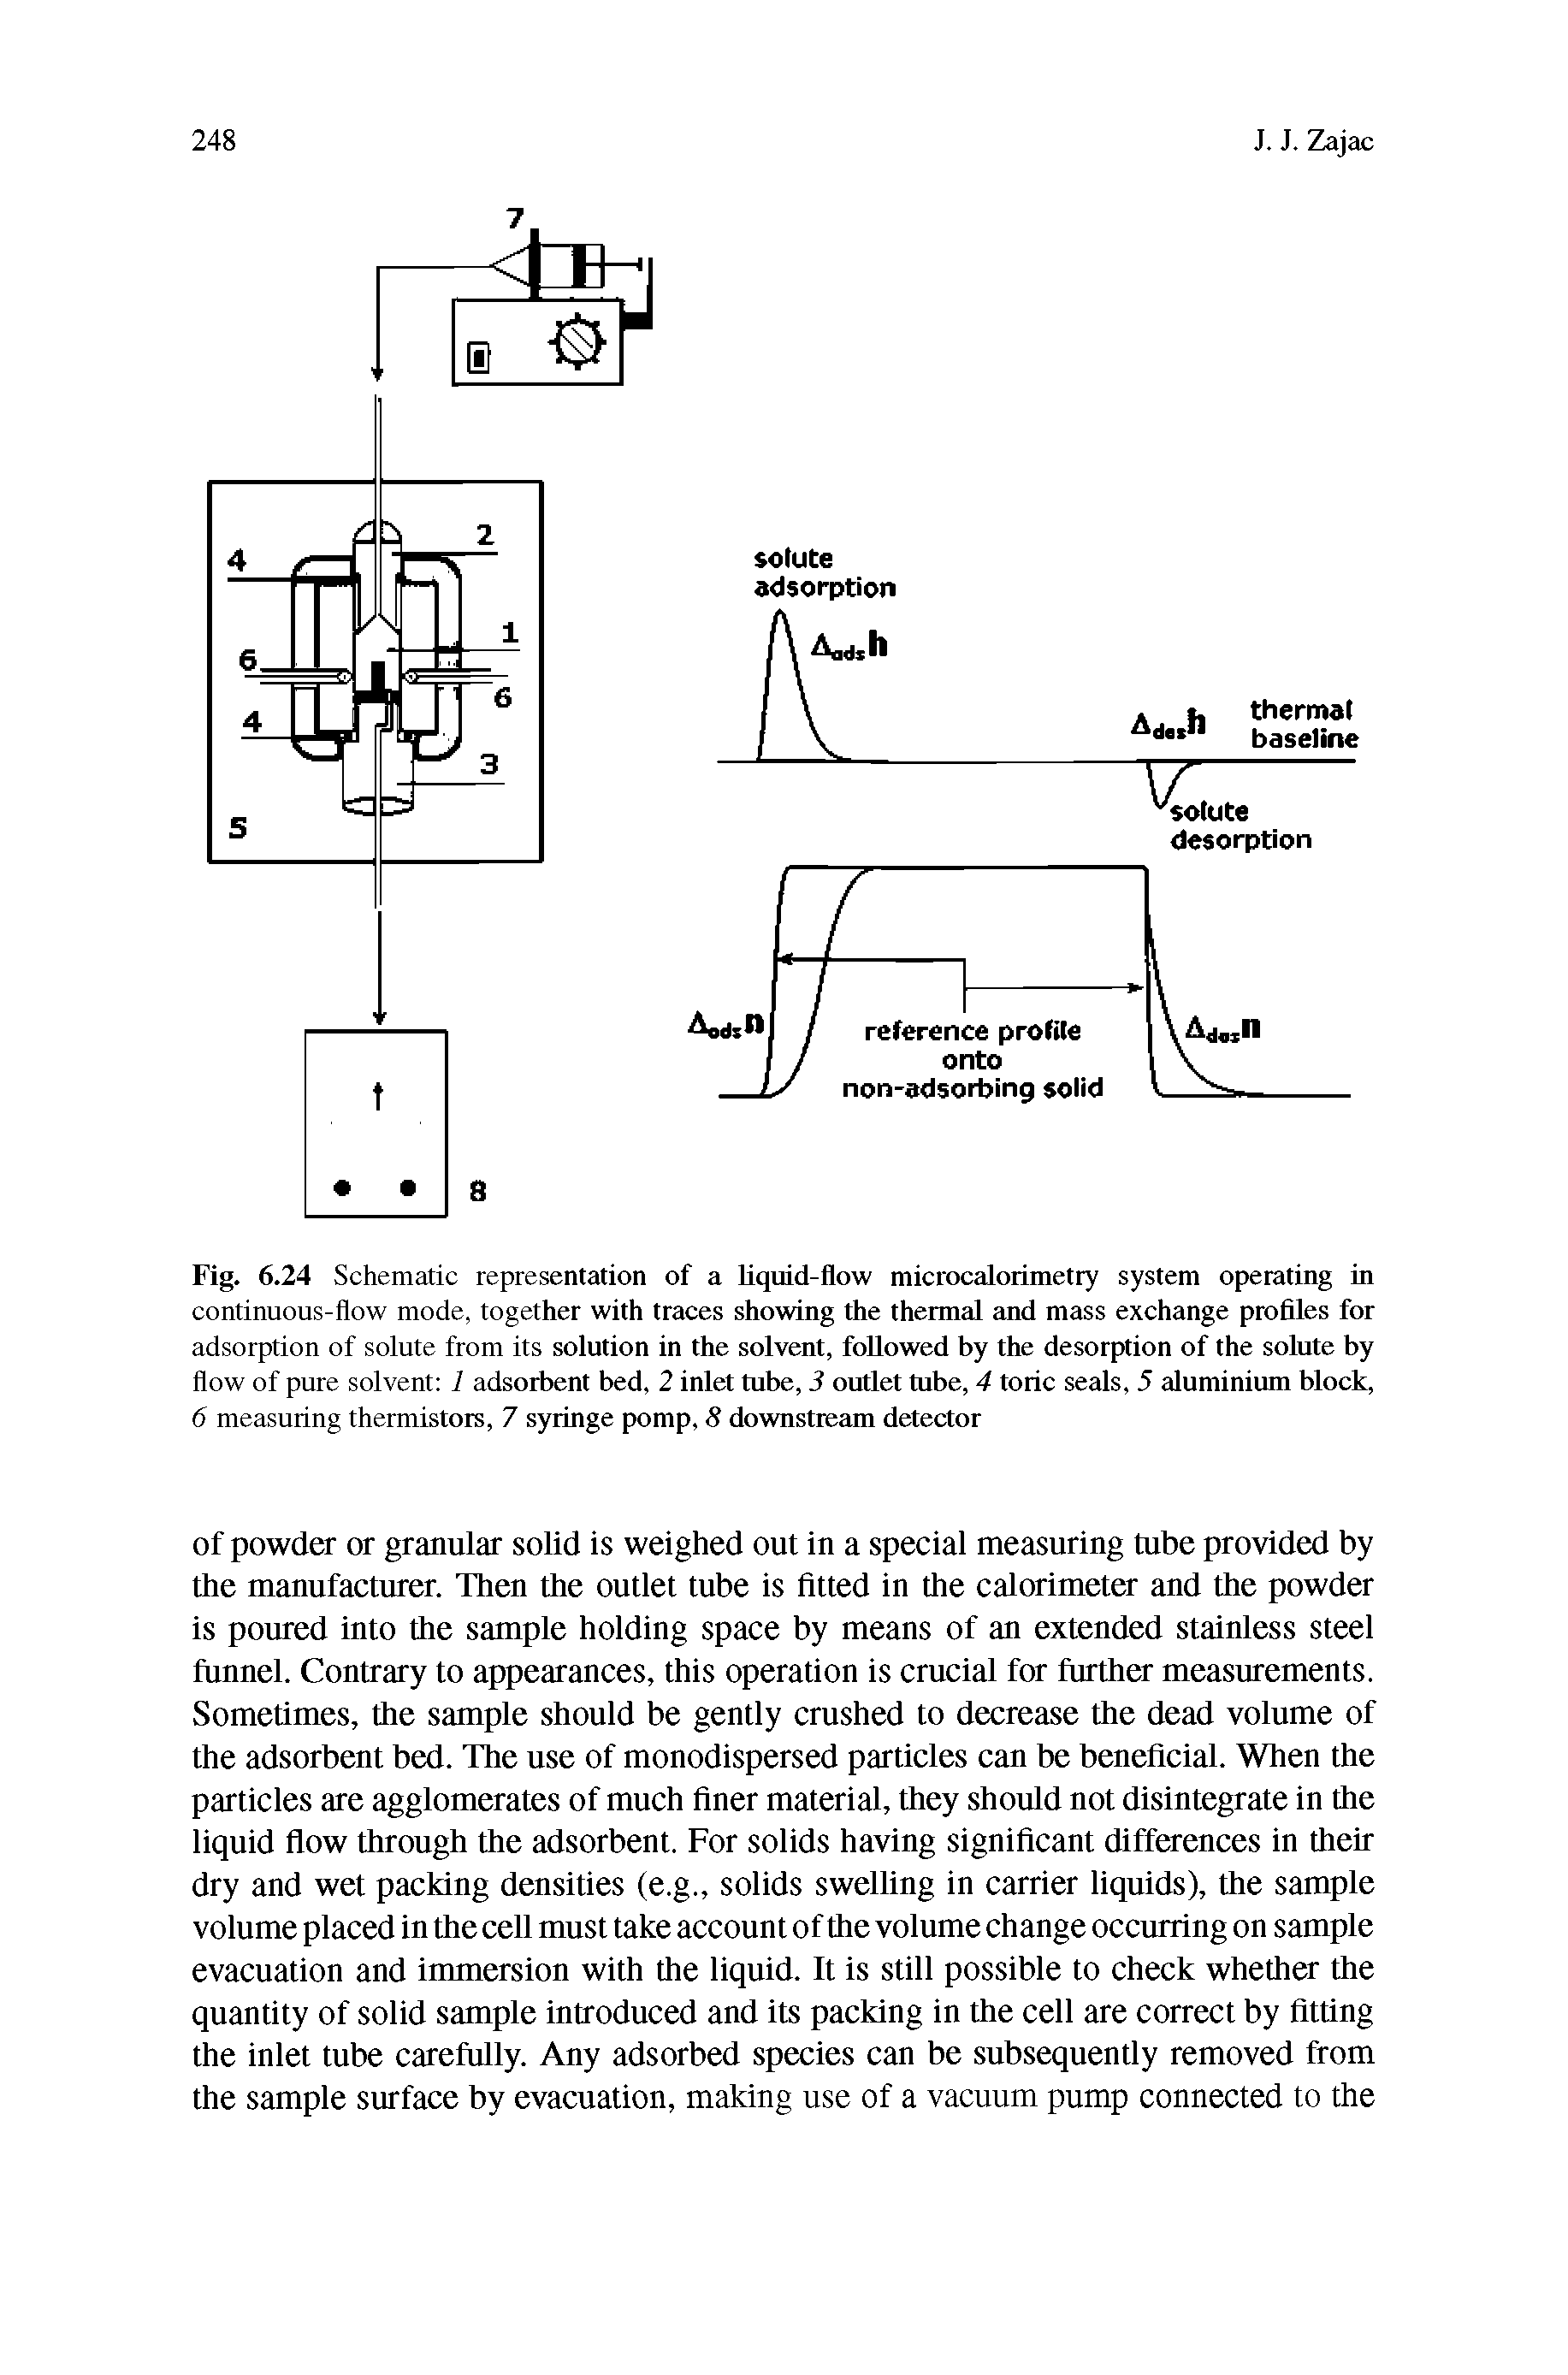 Fig. 6.24 Schematic representation of a liquid-flow microcalorimetry system operating in continuous-flow mode, together with traces showing the thermal and mass exchange profiles for adsorption of solute from its solution in the solvent, followed by the desorption of the solute by flow of pure solvent 1 adsorbent bed, 2 inlet tube, 3 outlet tube, 4 toric seals, 5 aluminium block, 6 measuring thermistors, 7 syringe pomp, 8 downstream detector...